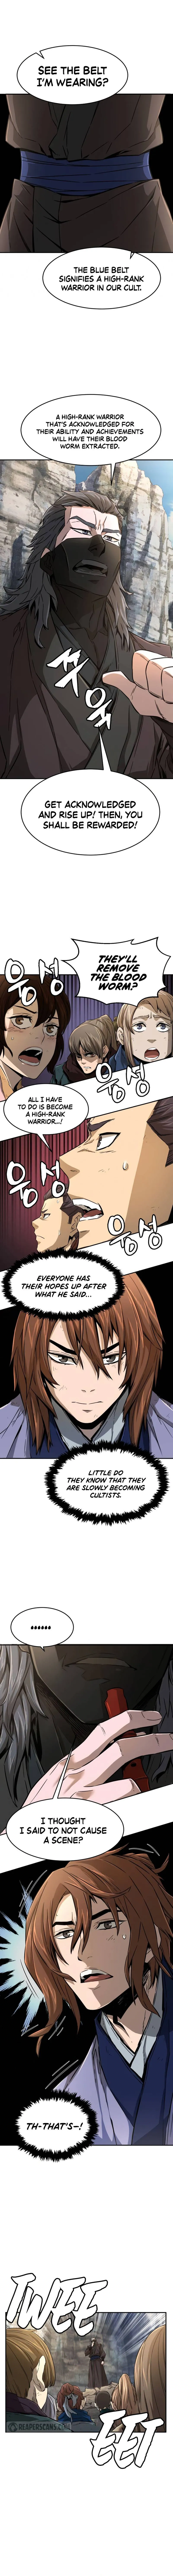 Absolute Sword Sense Chapter 6 page 7